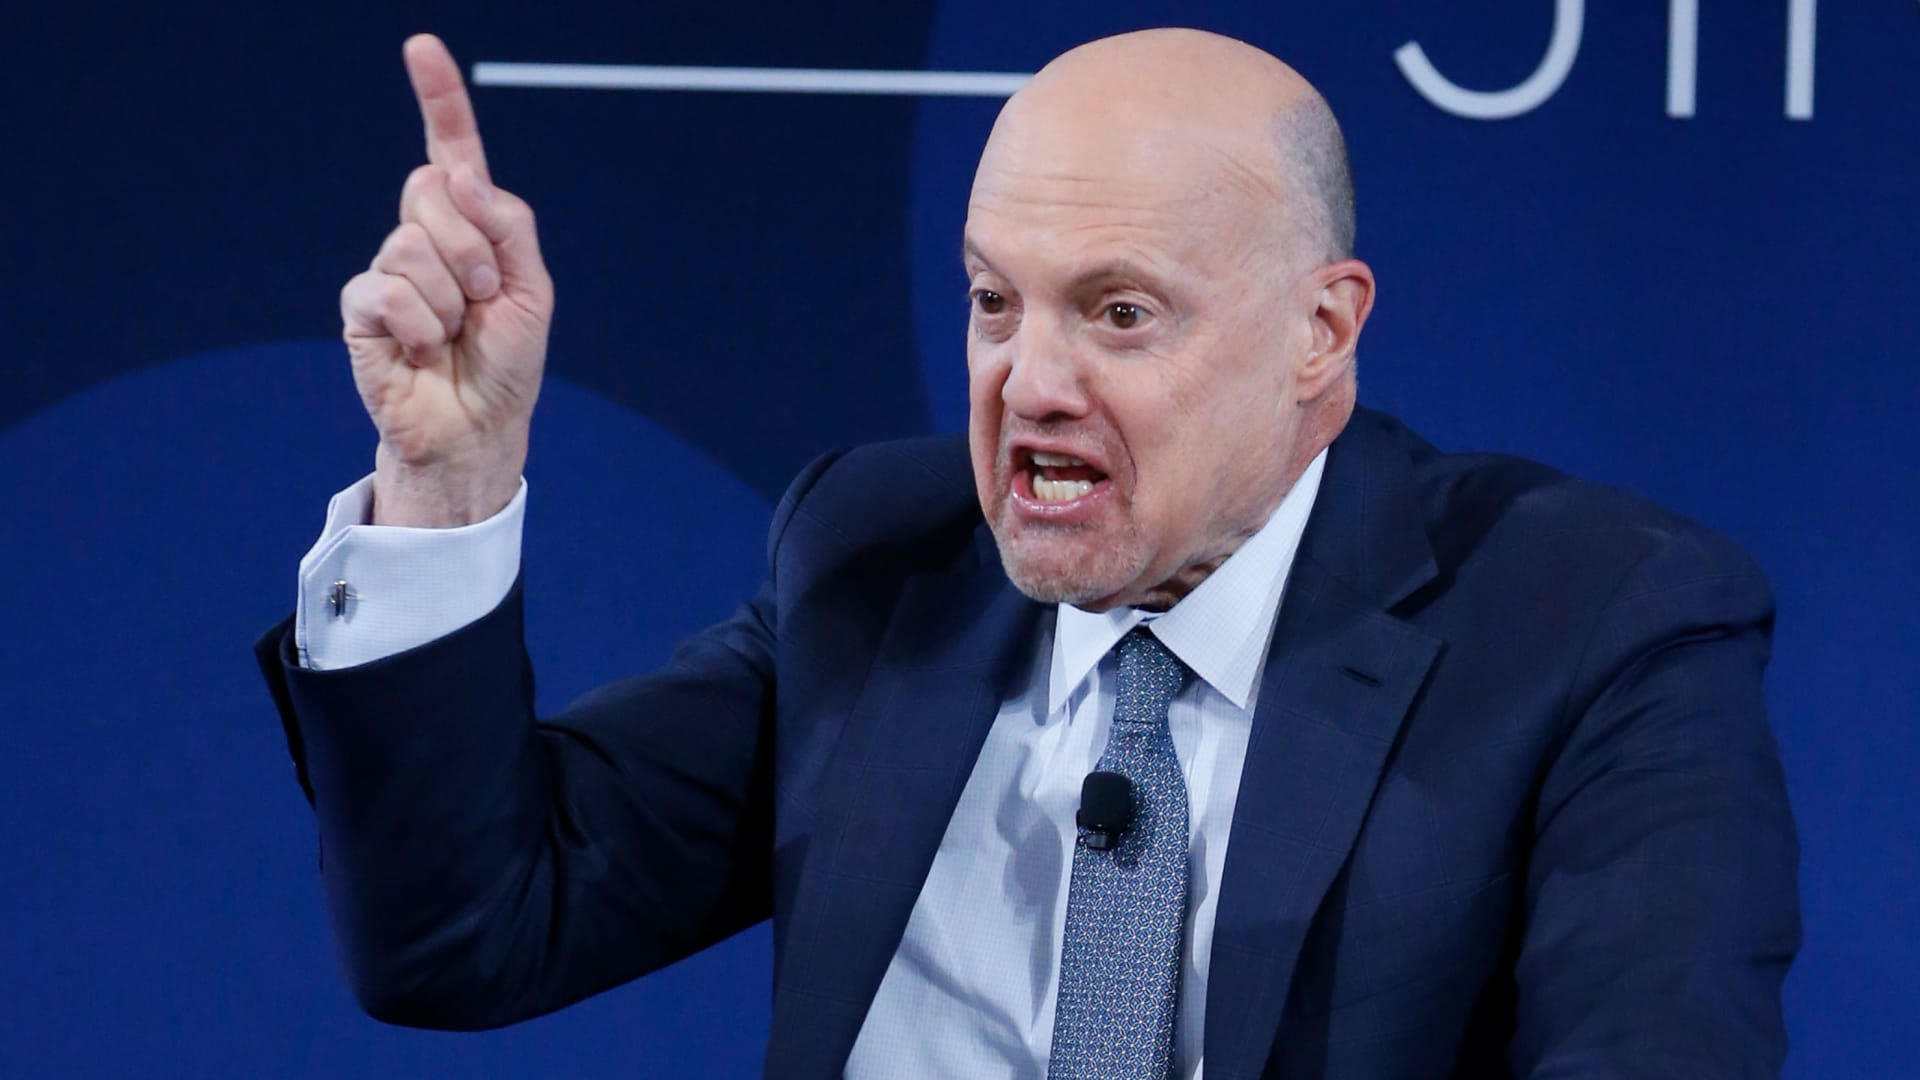 Jim Cramer sees the pullback in mega-cap tech as a potential buying opportunity